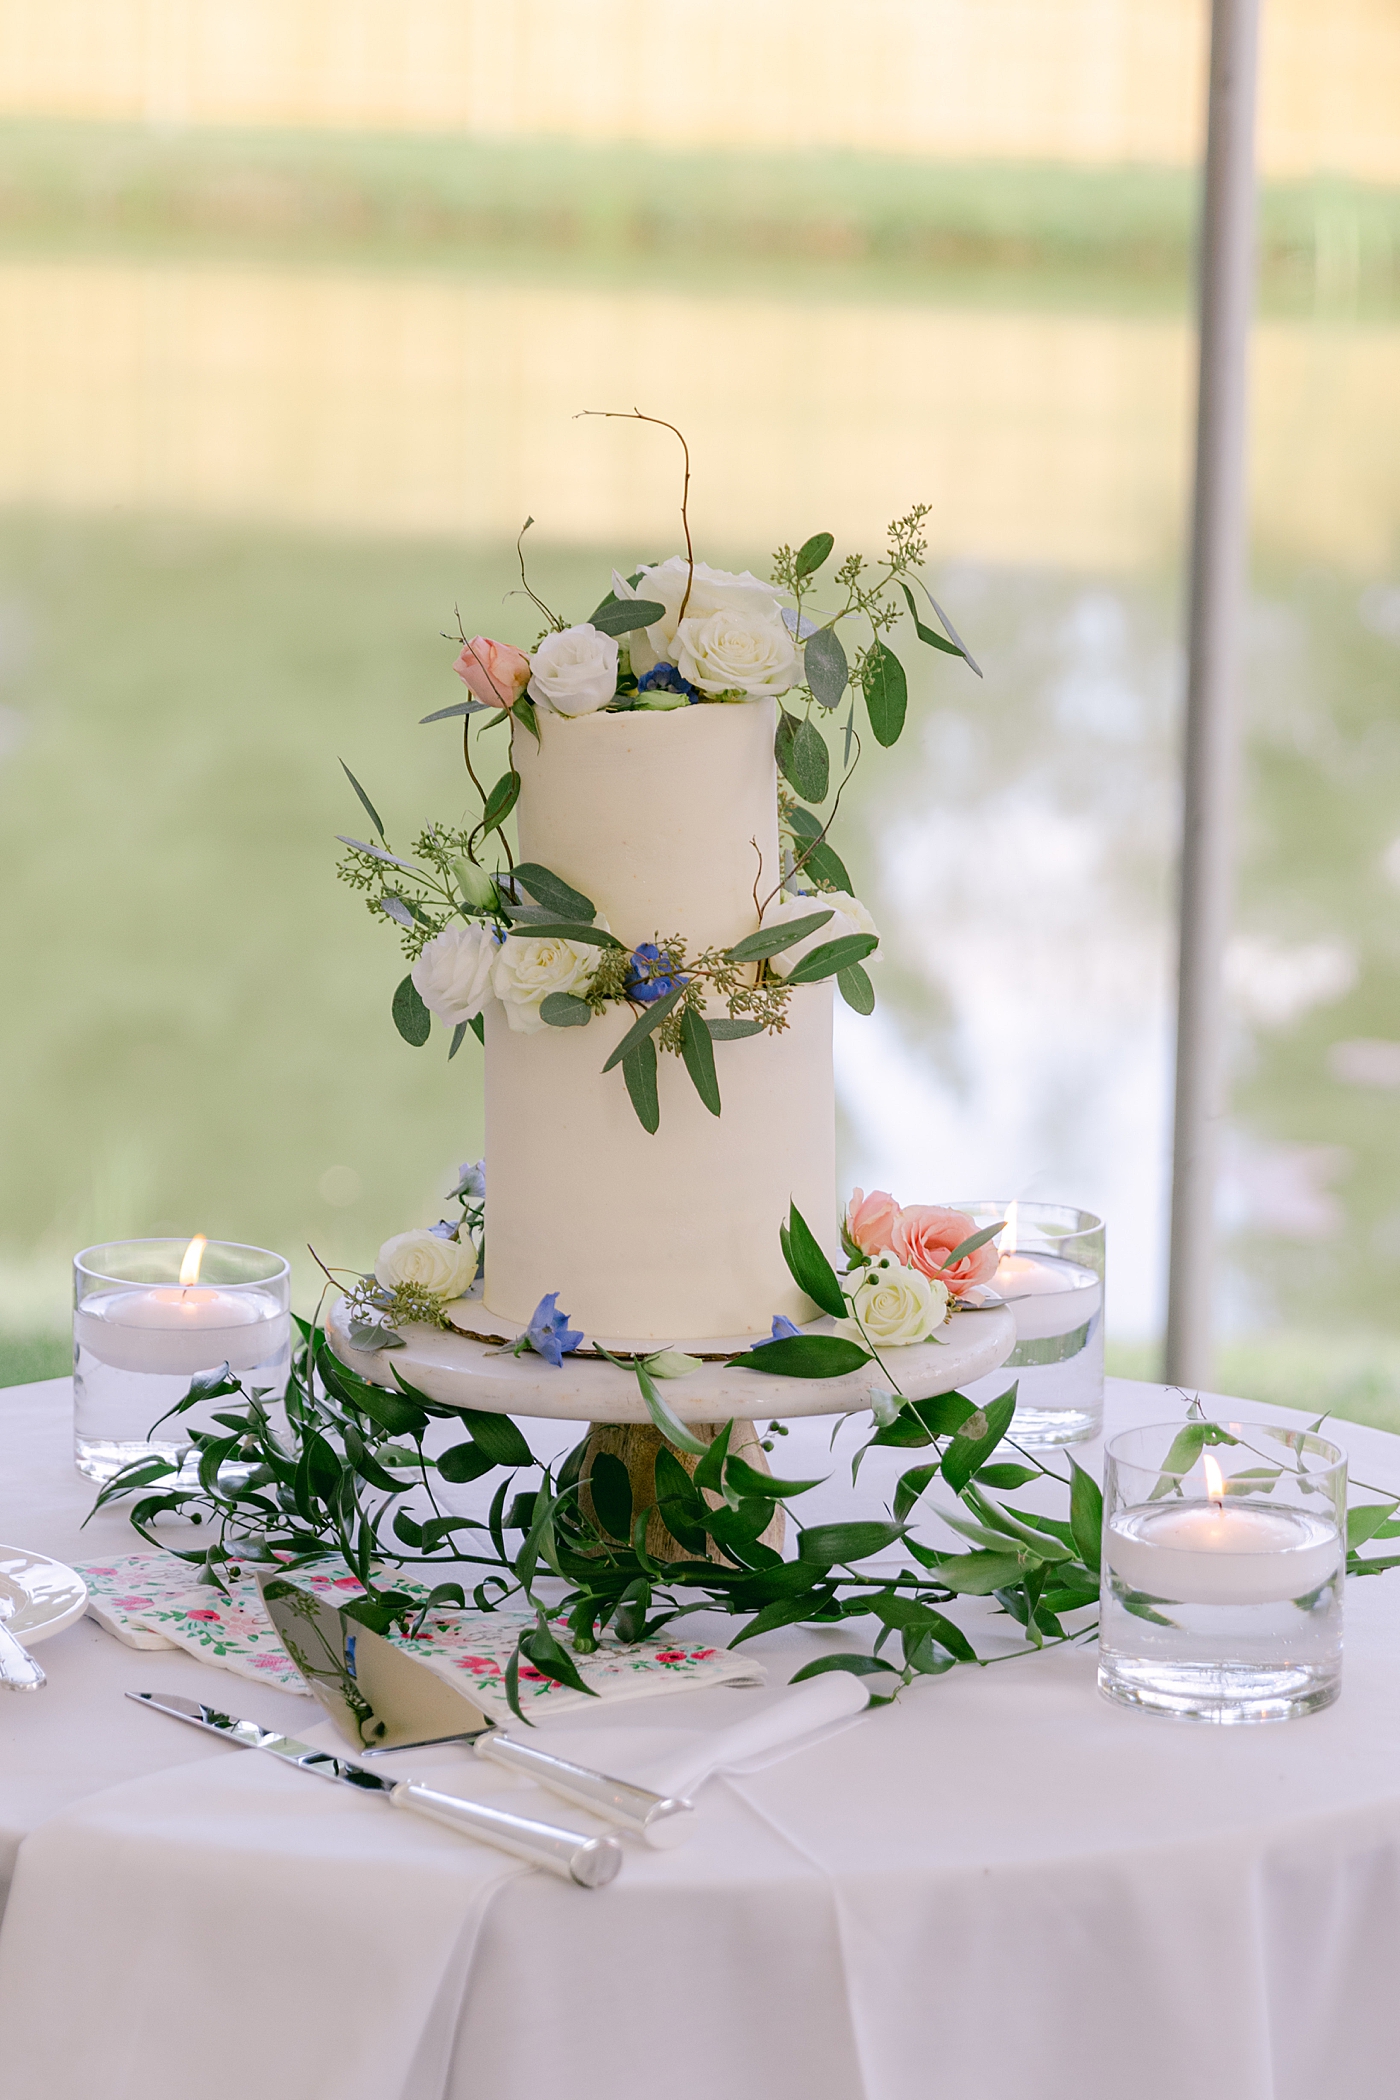 Wedding cake with greenery and flowers | Image by Hope Helmuth Photography